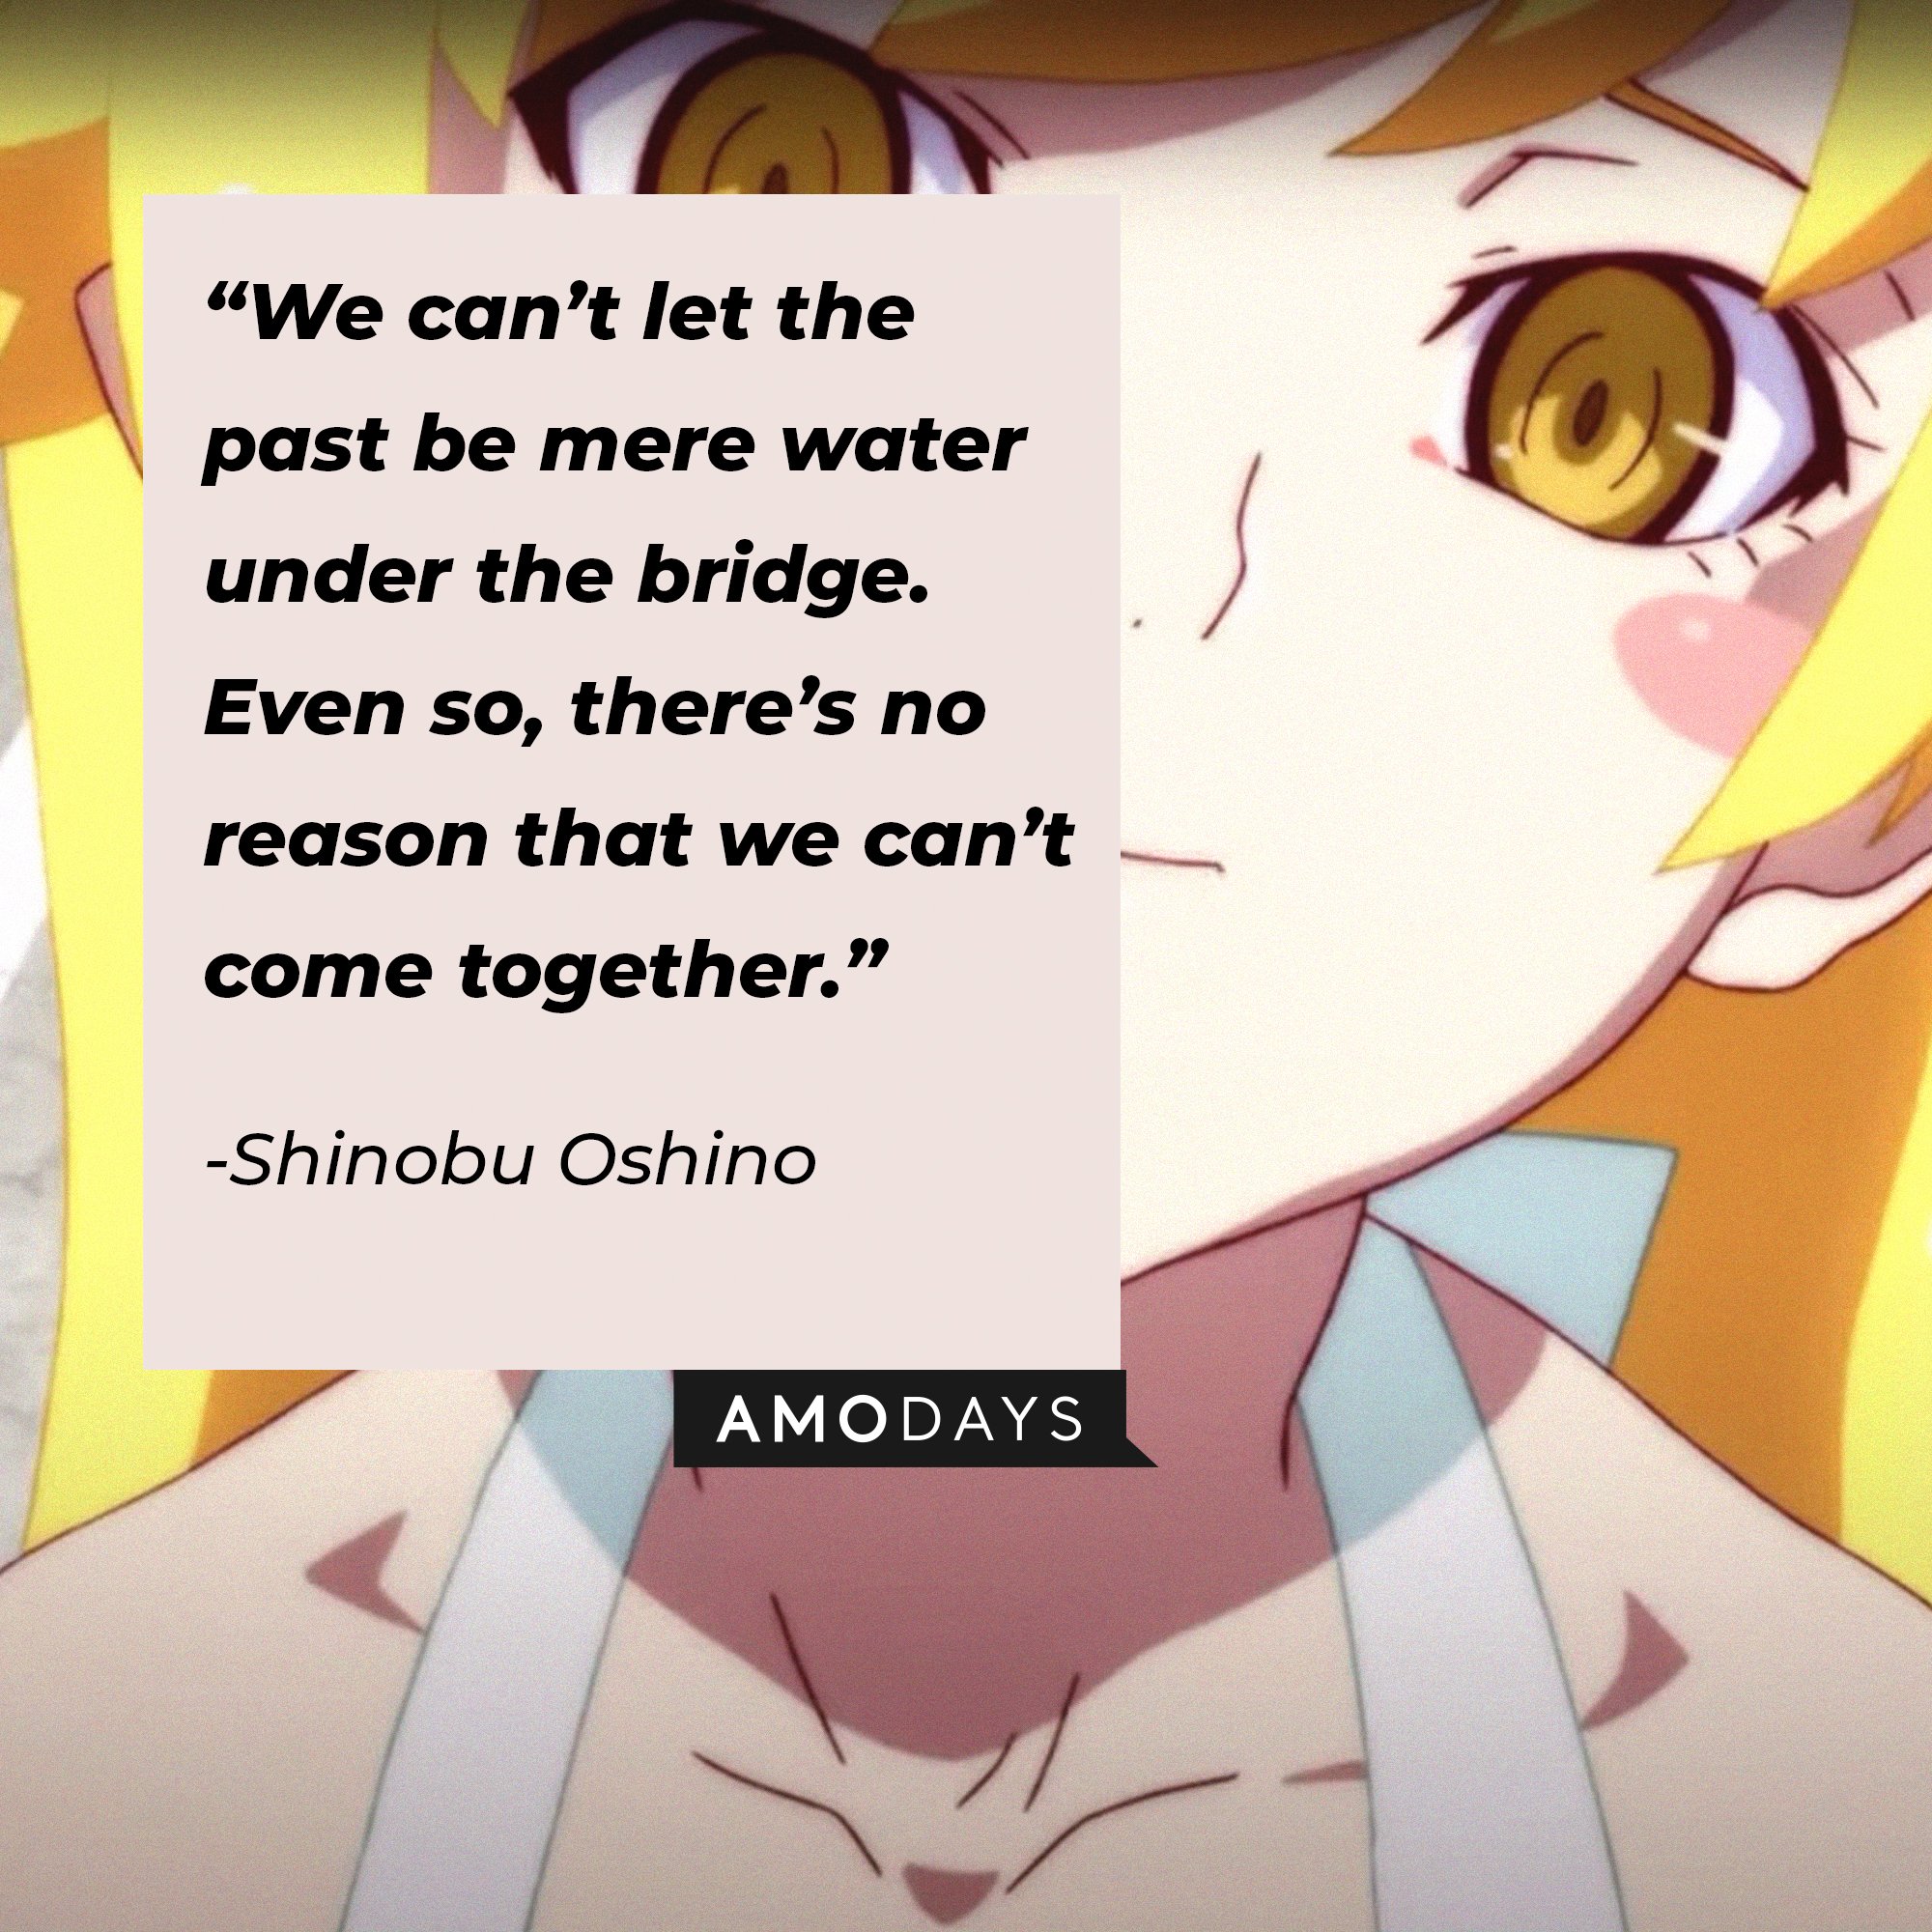 Shinobu Oshino’s quote: "We can't let the past be mere water under the bridge. Even so, there's no reason that we can't come together." | Image: AmoDays 